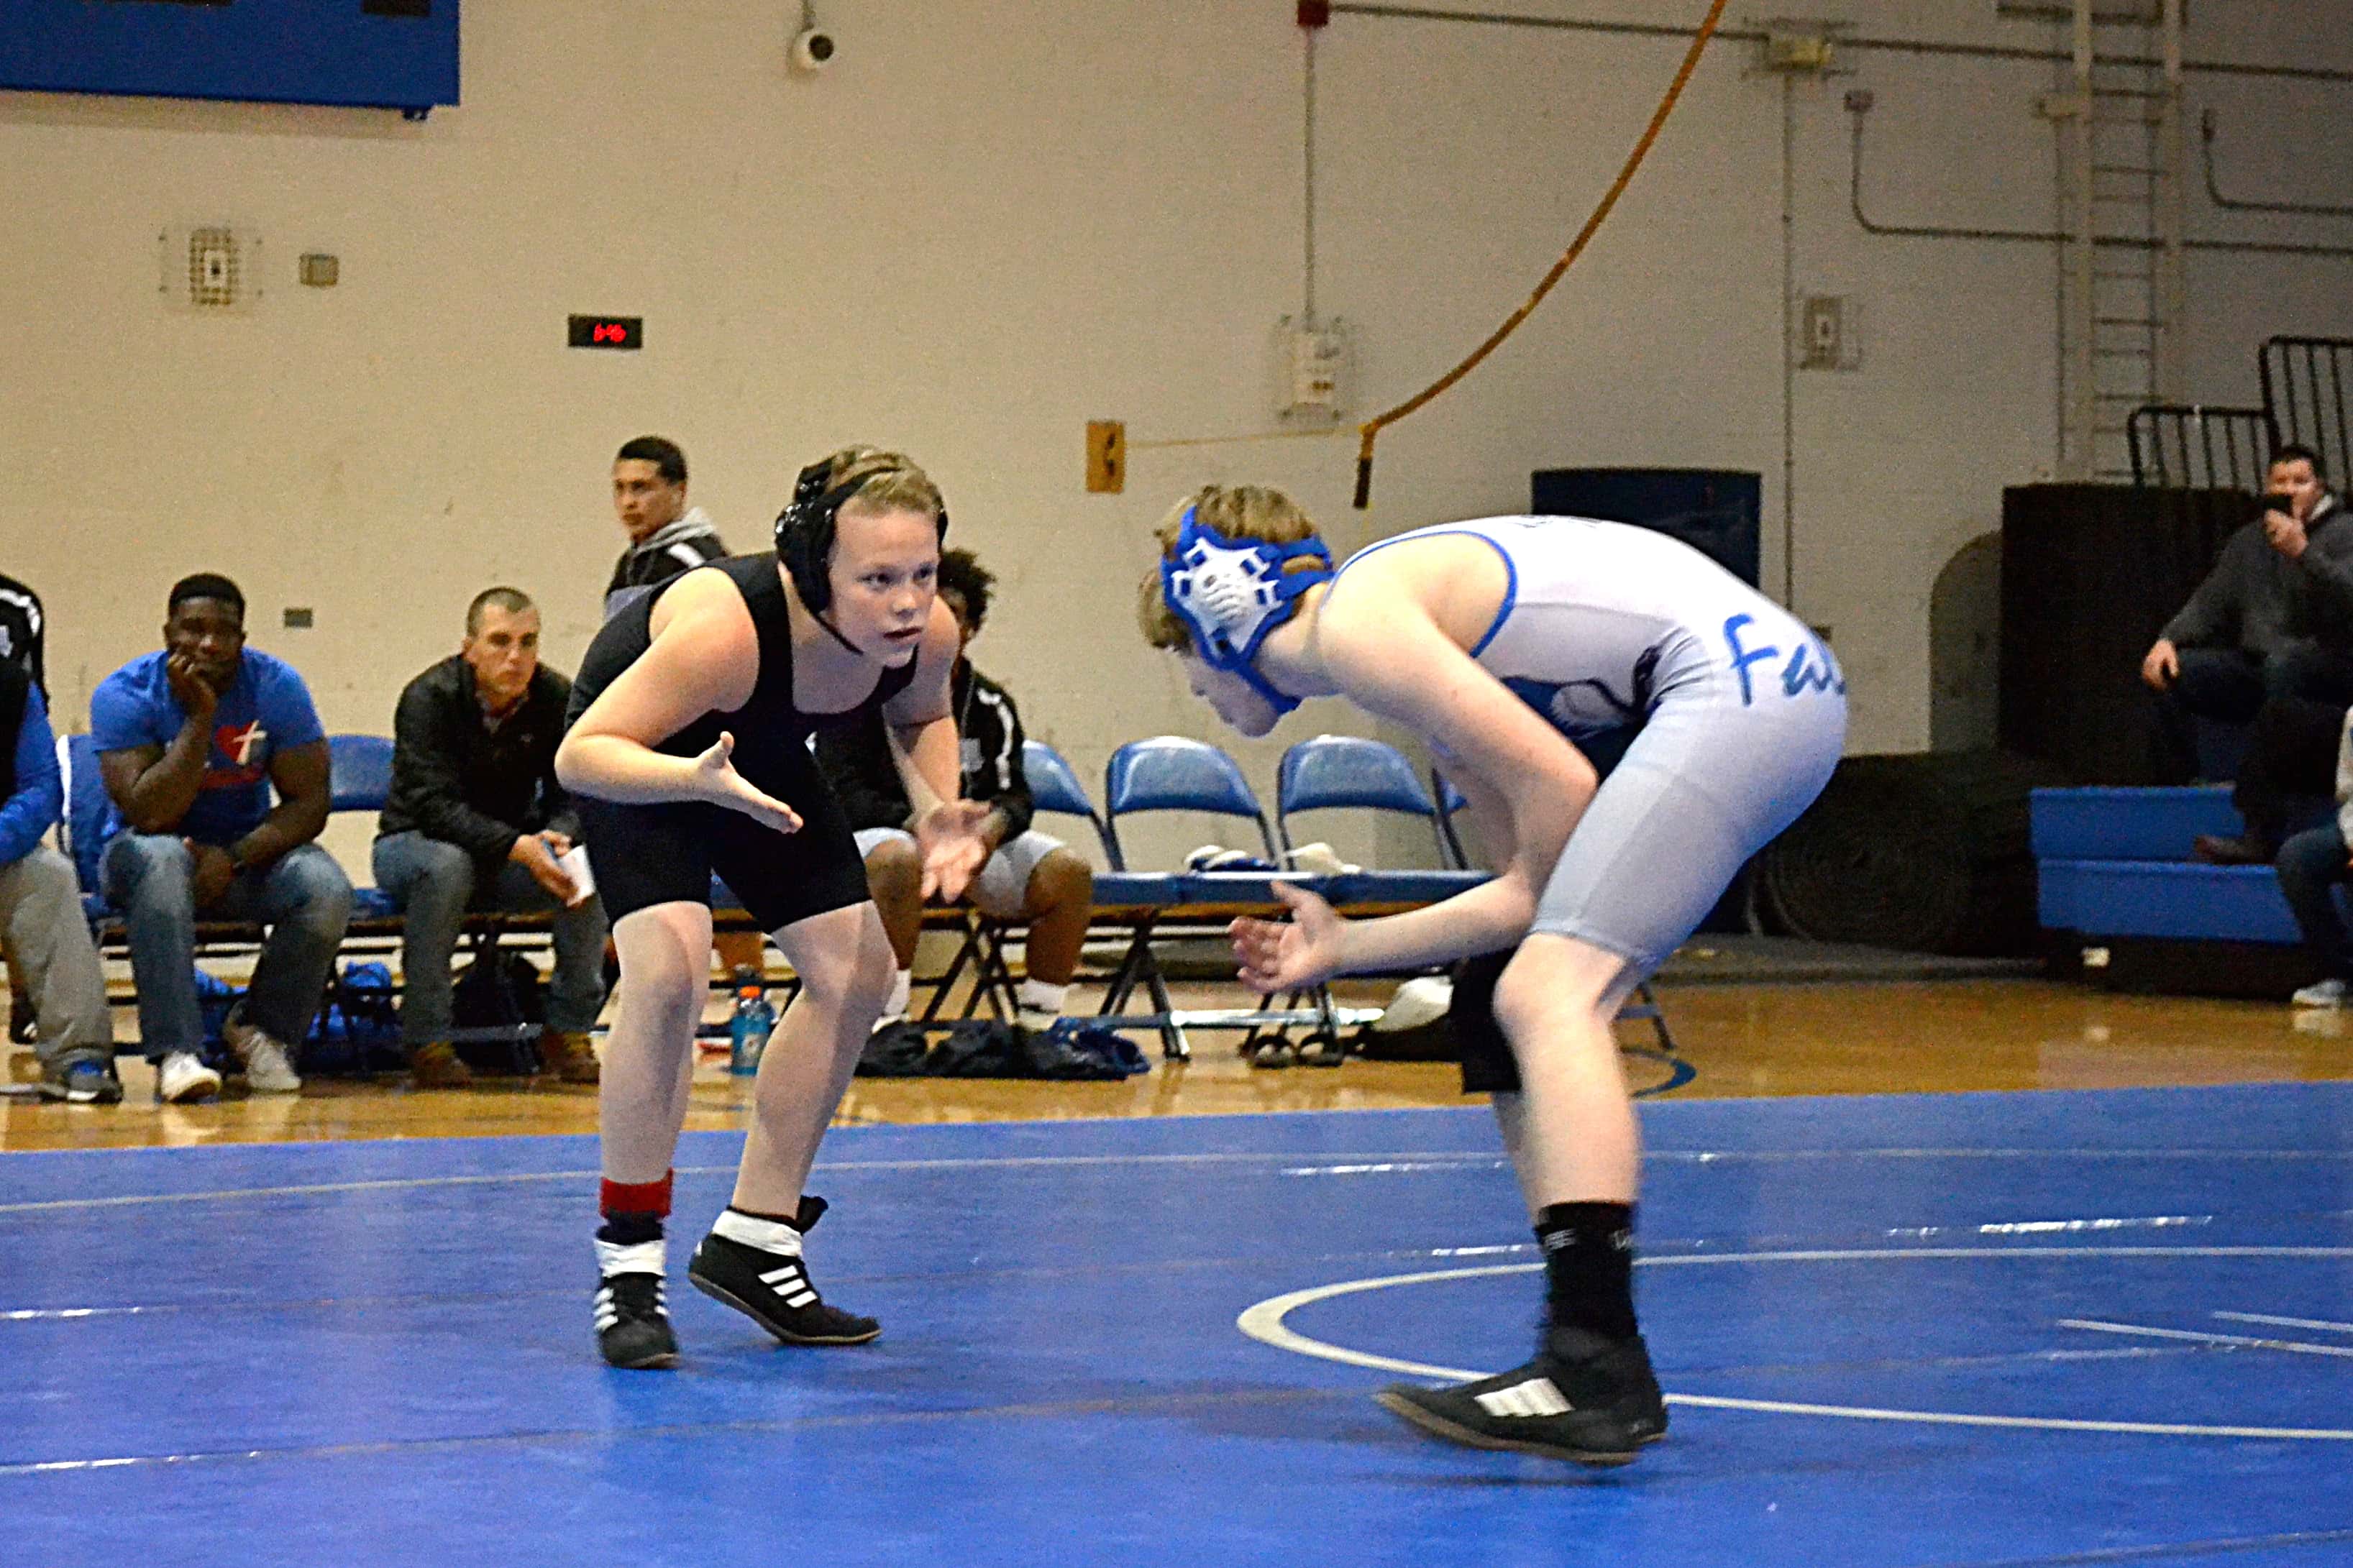 Liam Brubaugh fell to the Falcon’s Nevin Beggle at 120 lbs.: Liam Brubaugh fell to the Falcon's Nevin Beggle at 120 lbs.